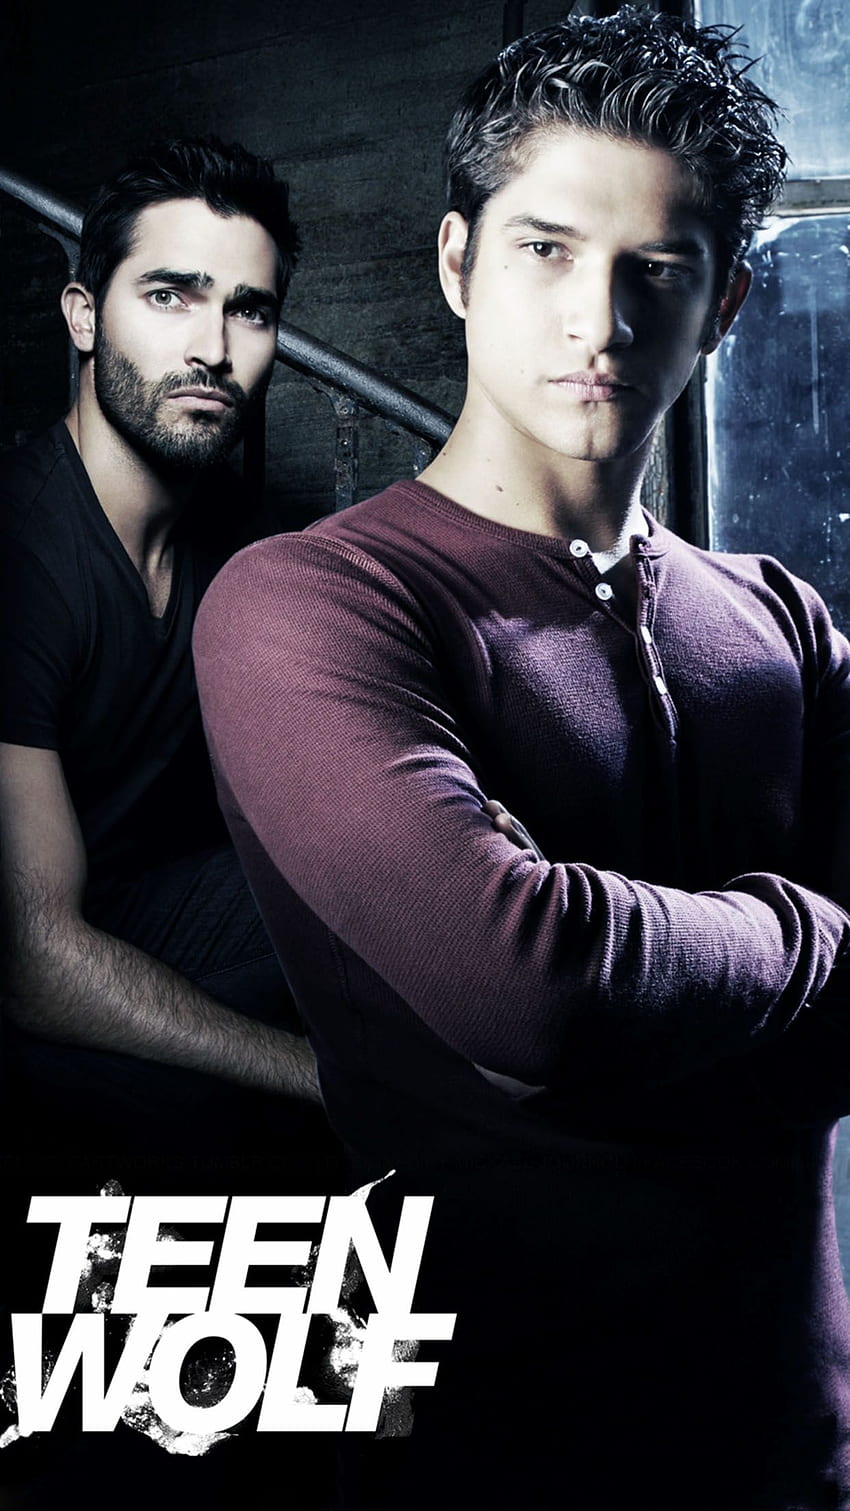 Teen Wolf: Tyler Hoechlin, Tyler Posey for iPhone 11, Pro Max, X, 8, 7, 6 - on 3 HD phone wallpaper